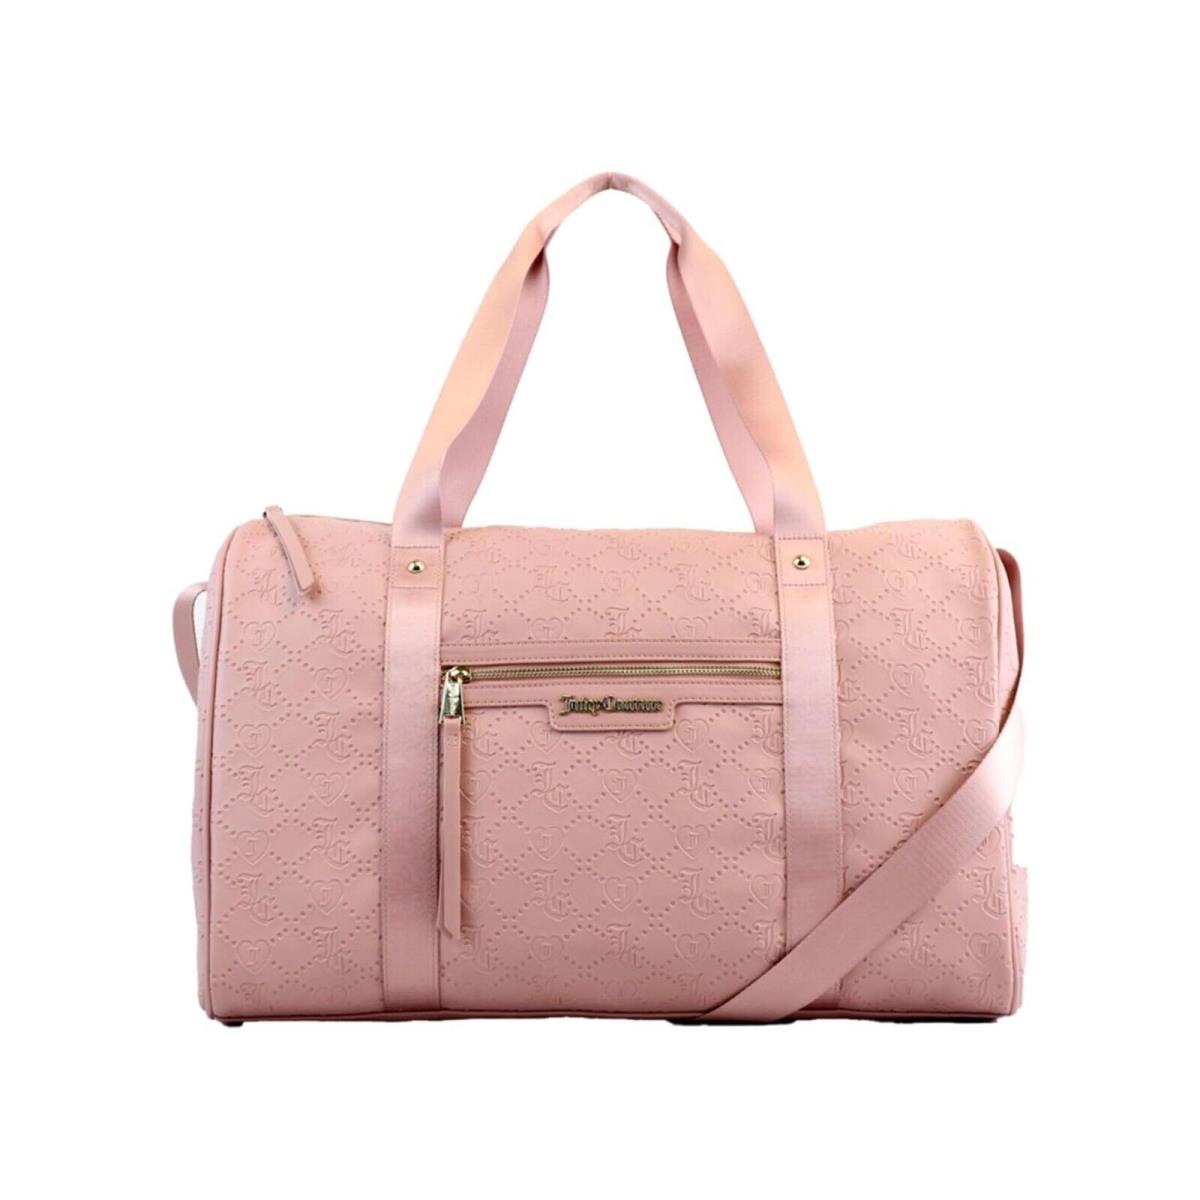 Juicy Couture Rosie Overnight Duffle Weekender Large Bag Dusty Blush JC Logo